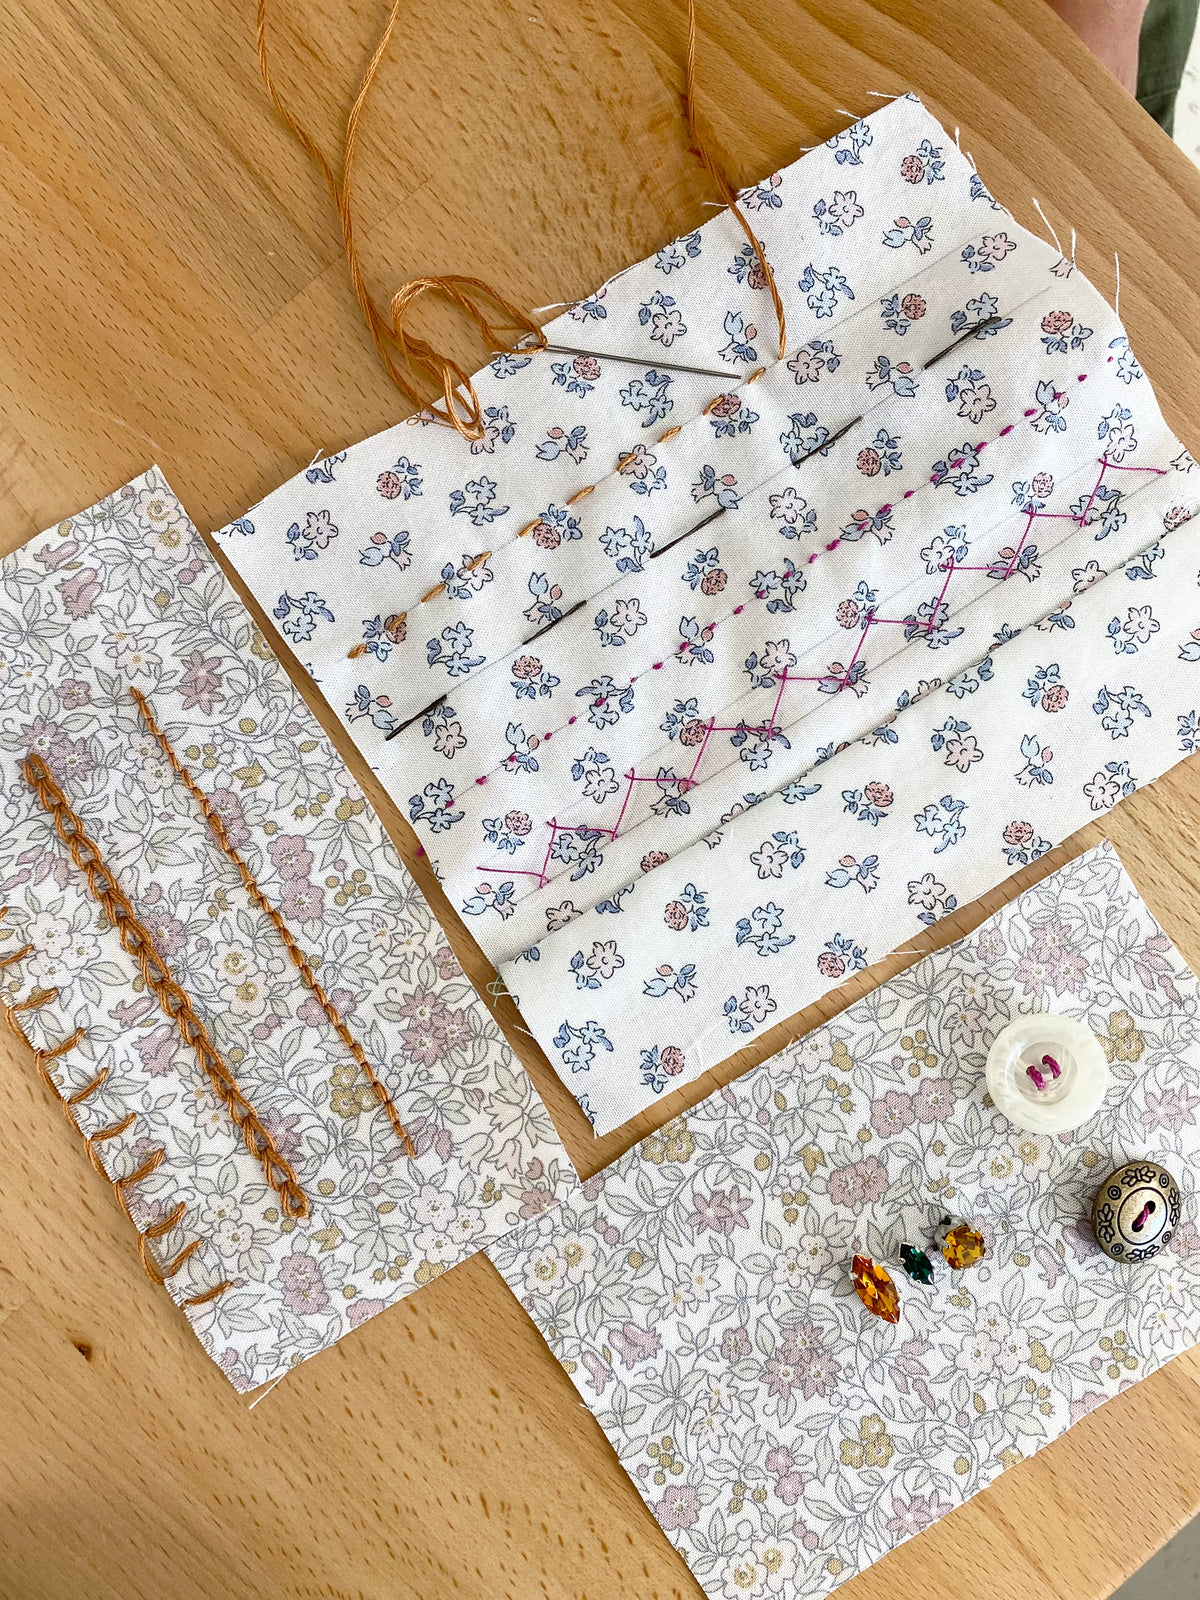 Hand Sewing, Mending and Embellishments with Michelle Kim